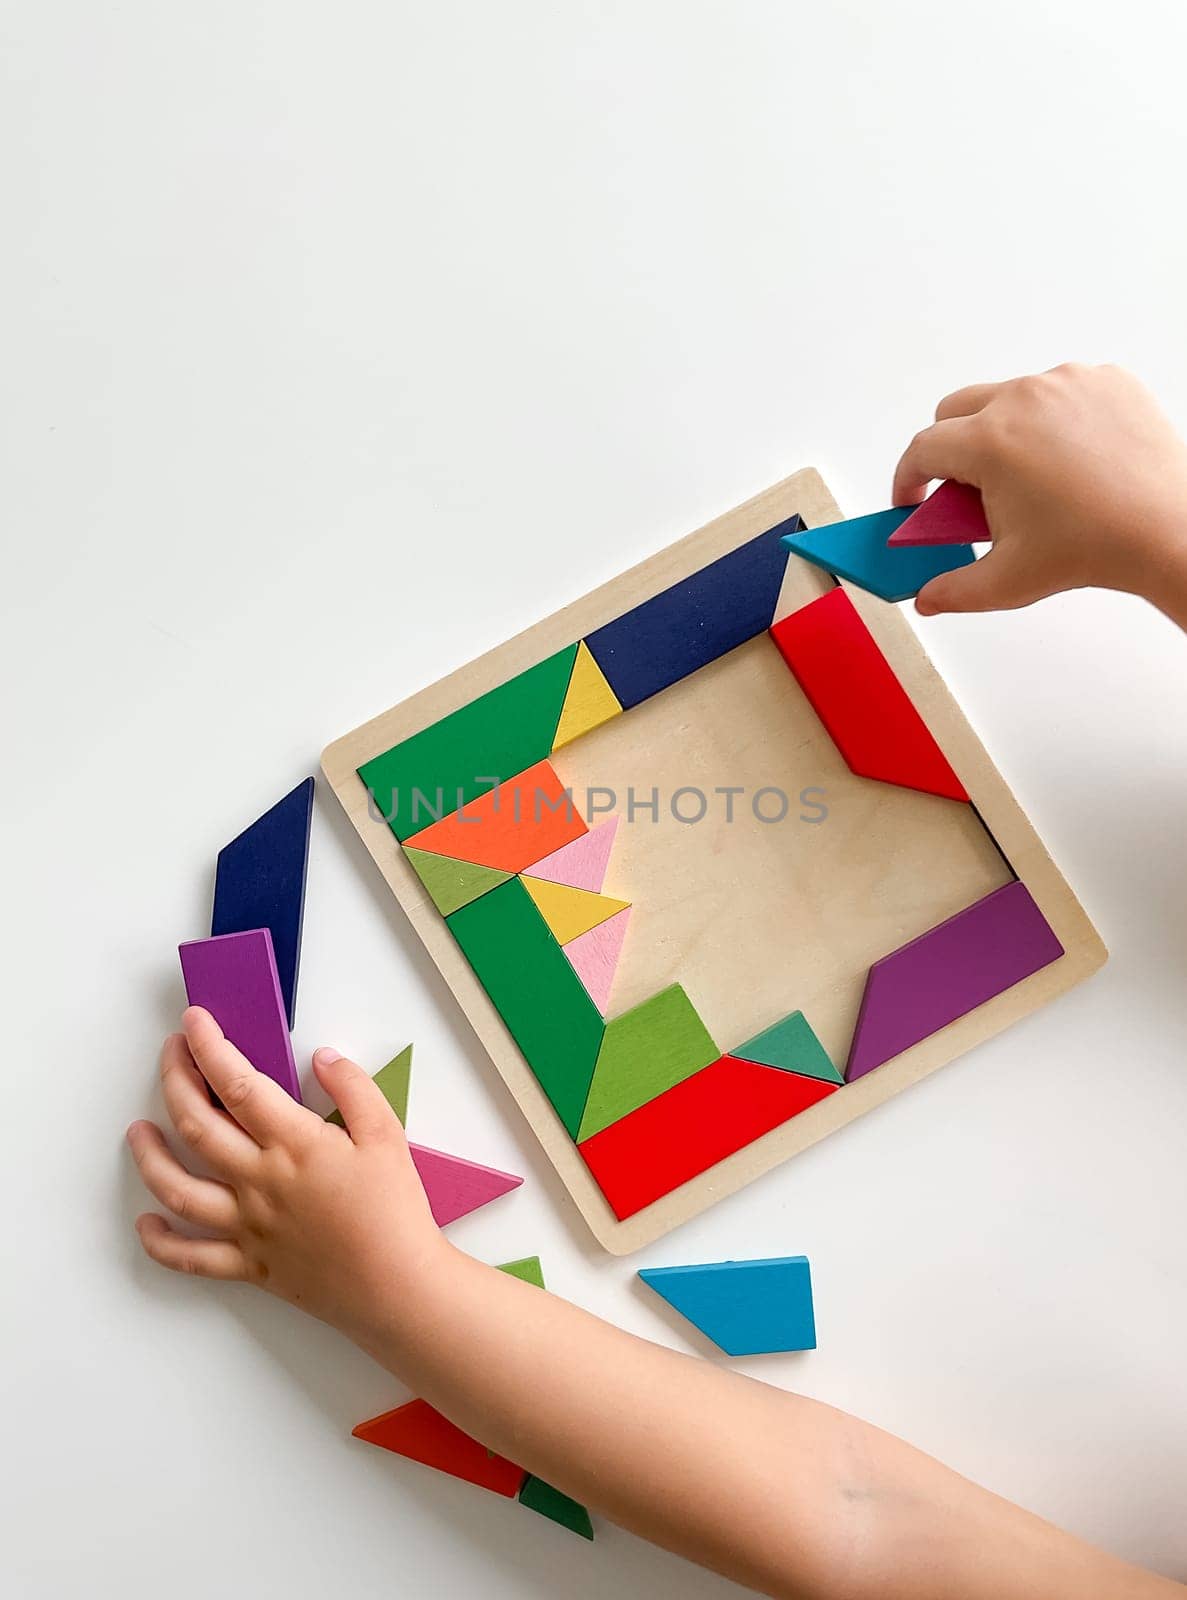 childs hand collects multicolored wooden mosaic on white background. by Lunnica